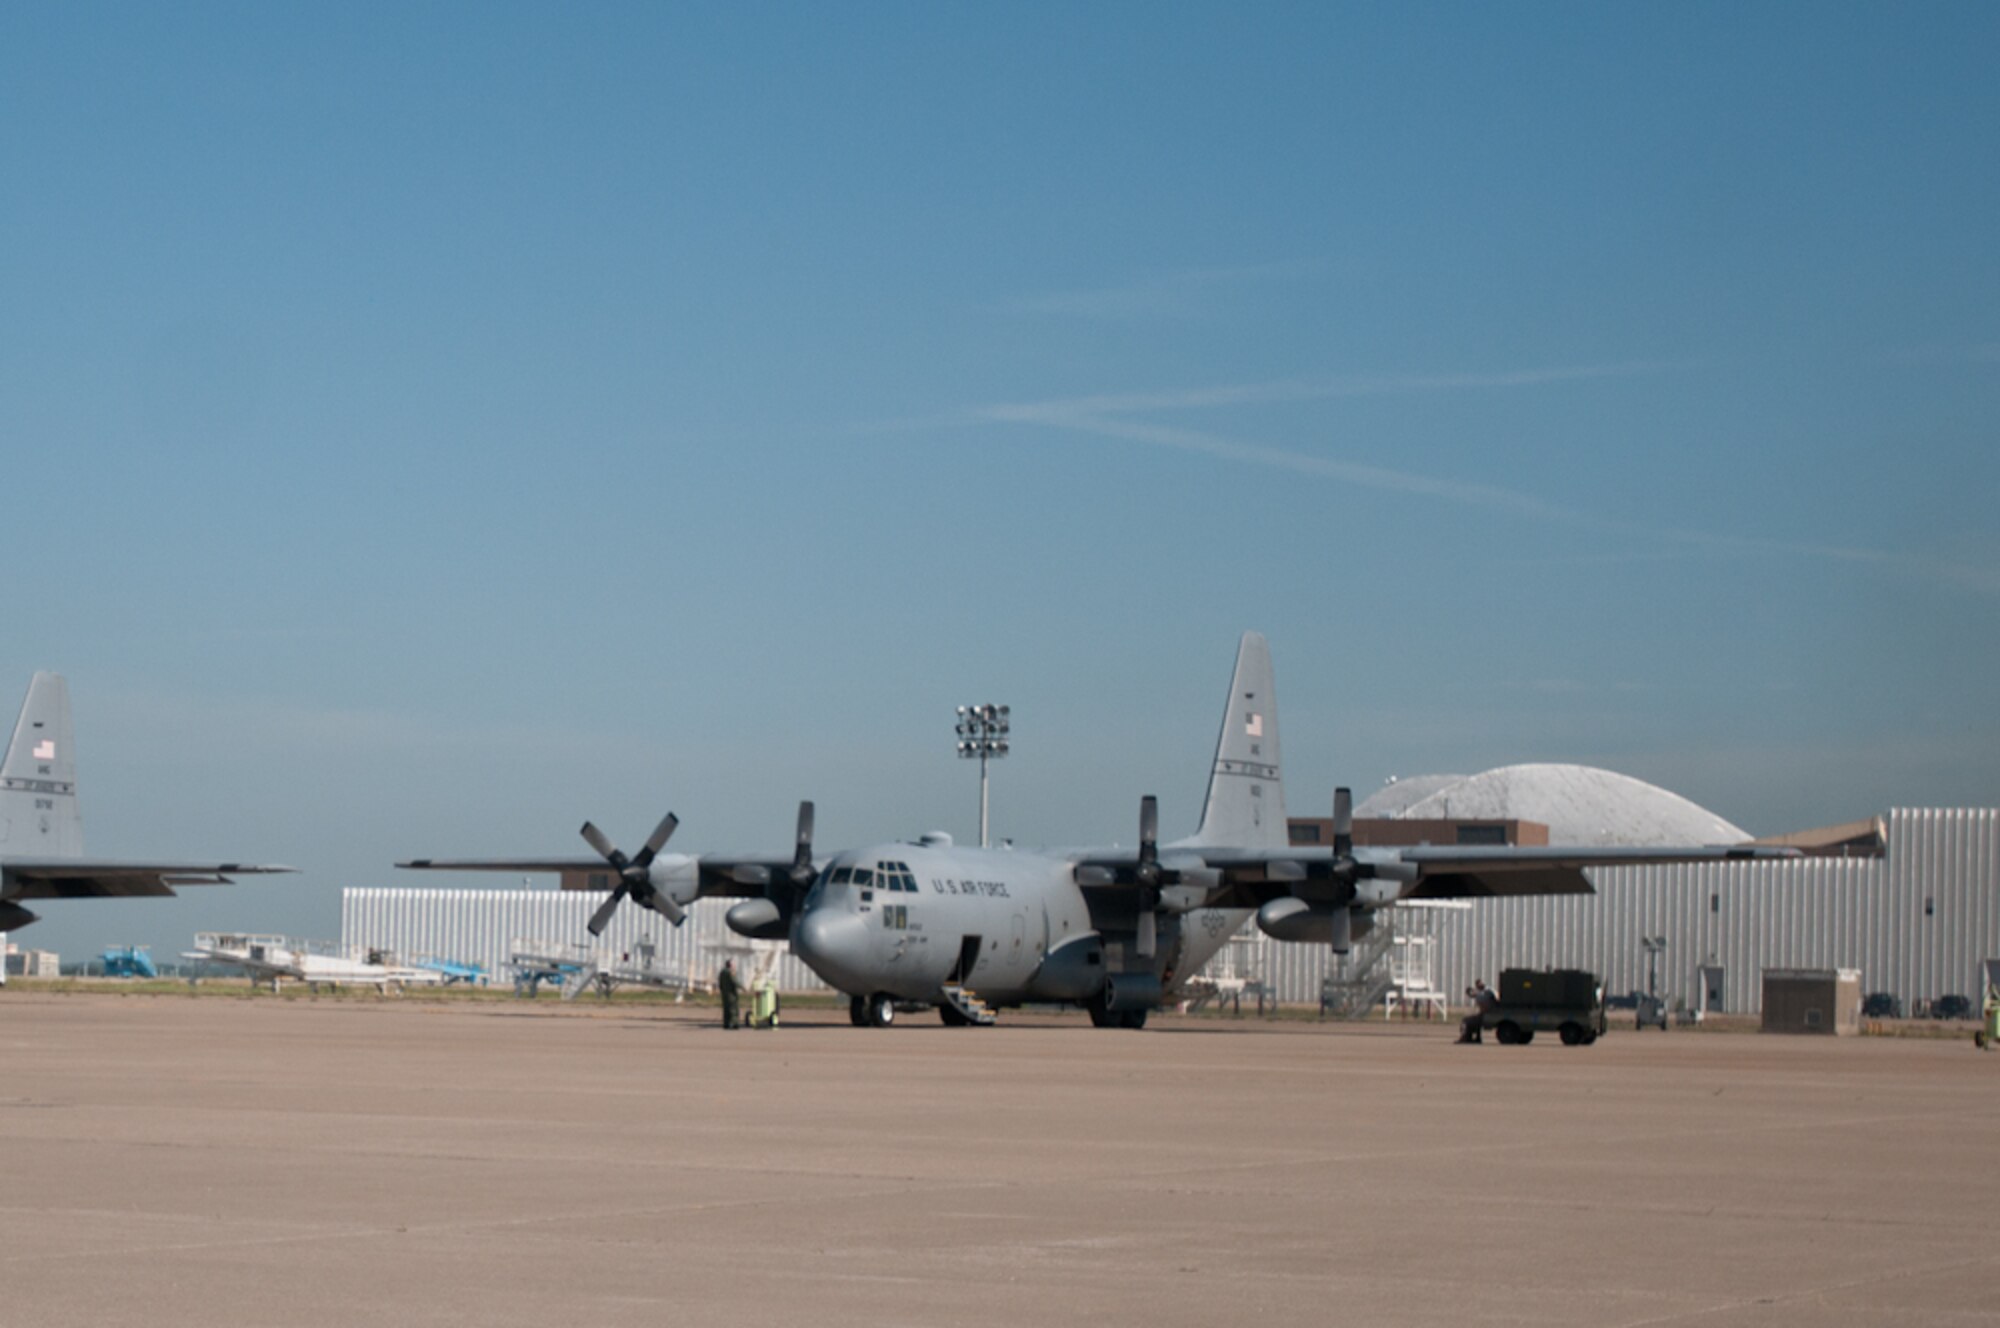 C-130s are prepped and ready for flight by members of the 139th Airlift Wing, Missouri Air National Guard, at the Kansas City International Airport in Kansas City, Mo., July 26, 2011. (U.S. Air Force photo by Senior Airman Katie Kidd)